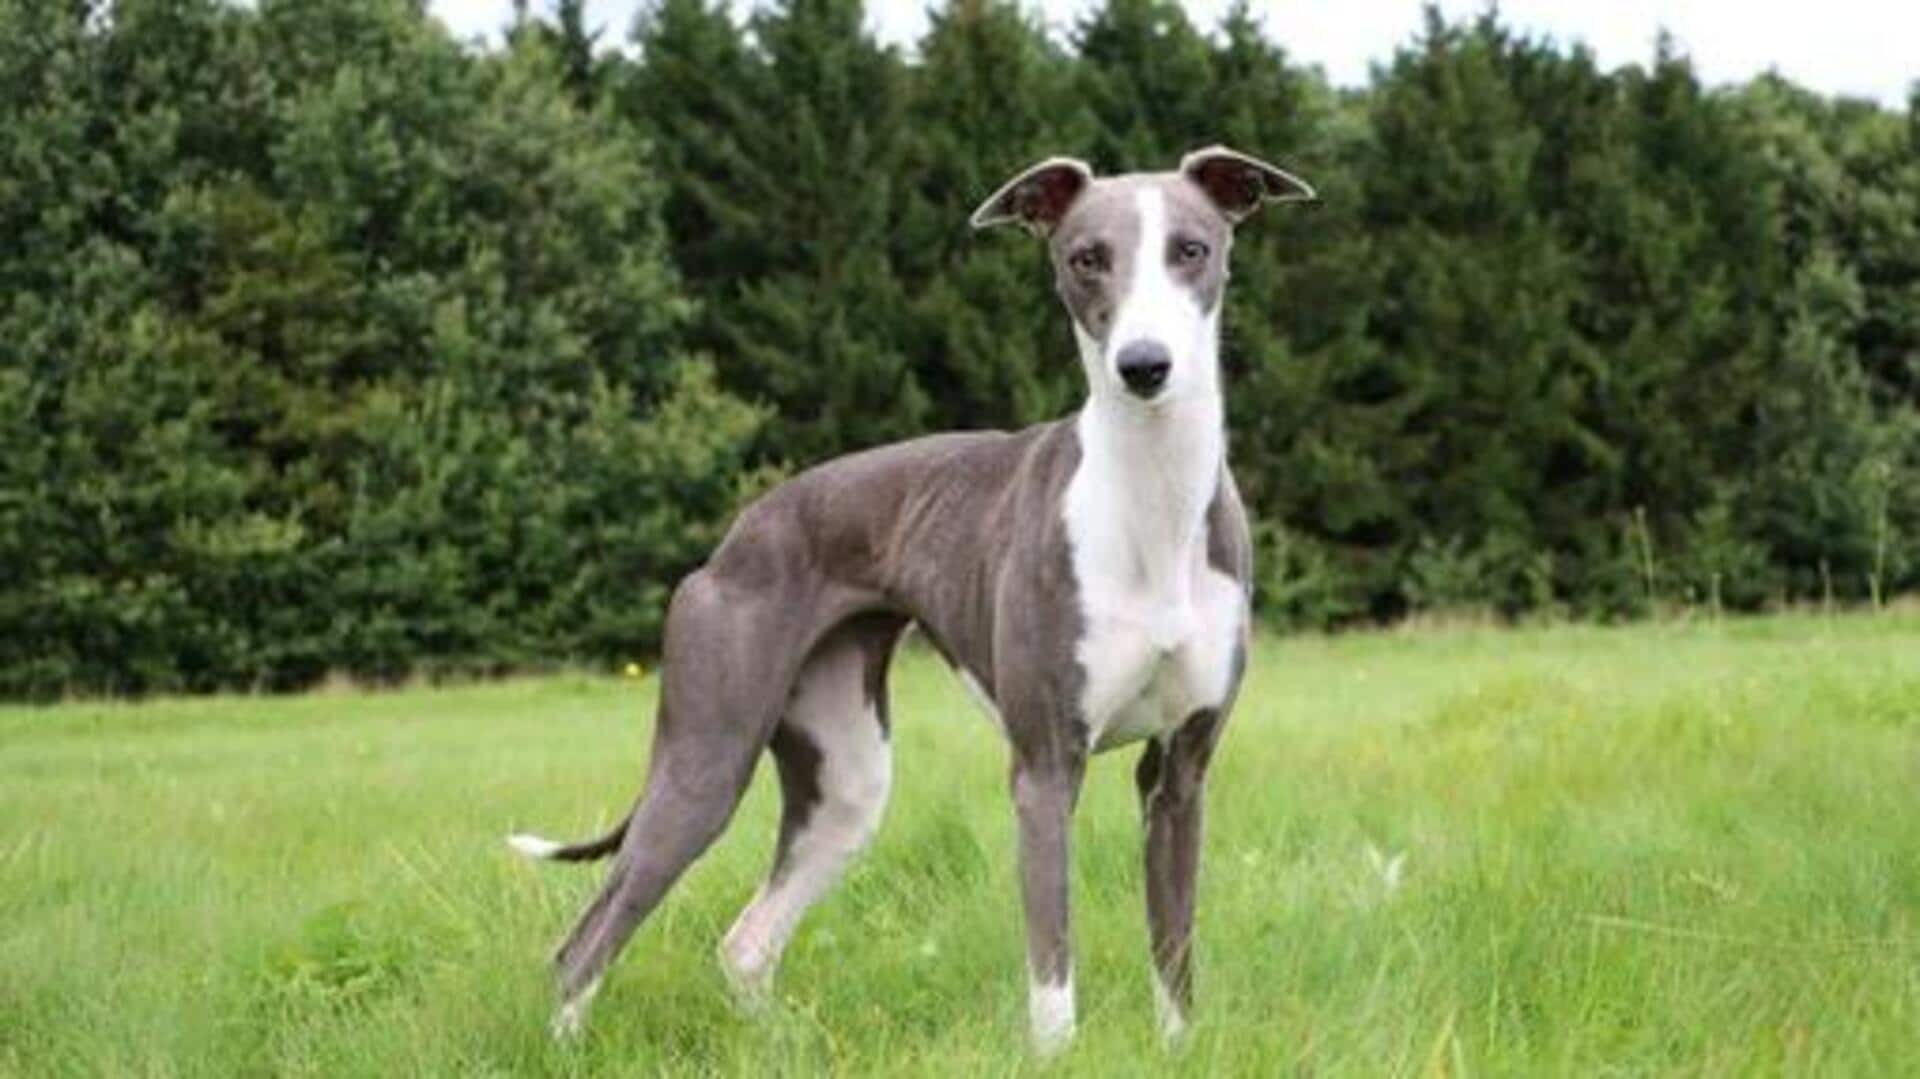 Calming the quivers: Solutions for Whippet separation anxiety 